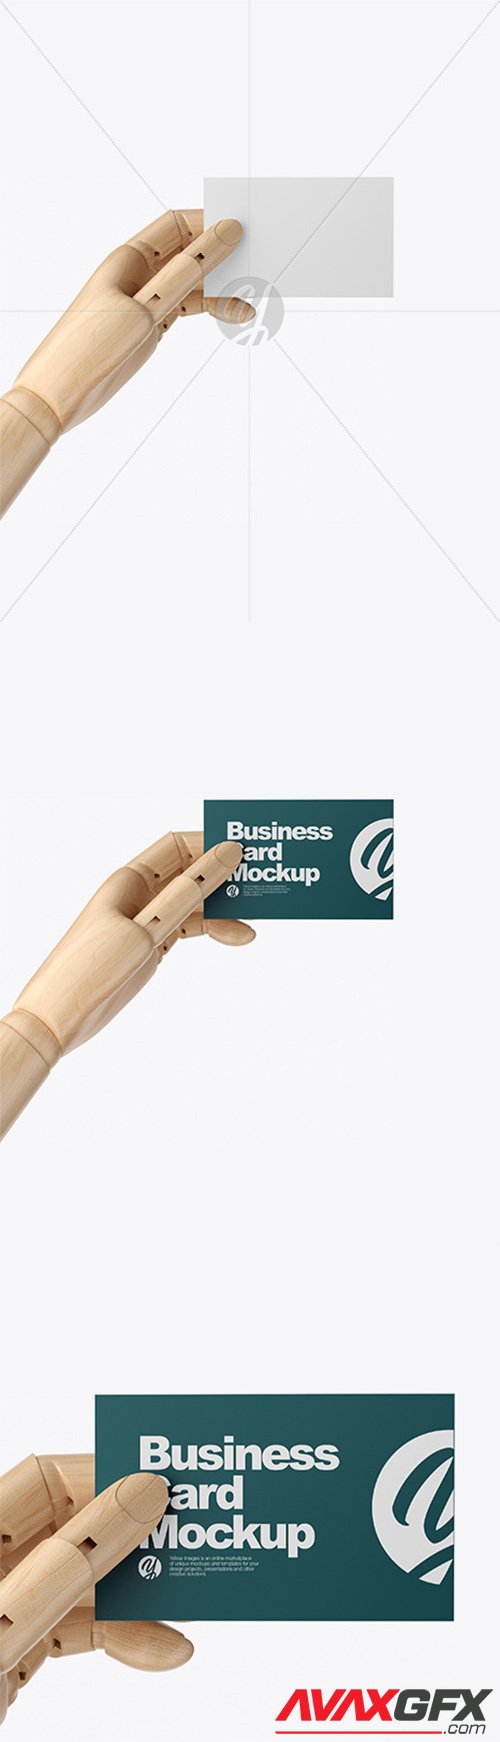 Wooden Hand With Business Card Mockup 60218